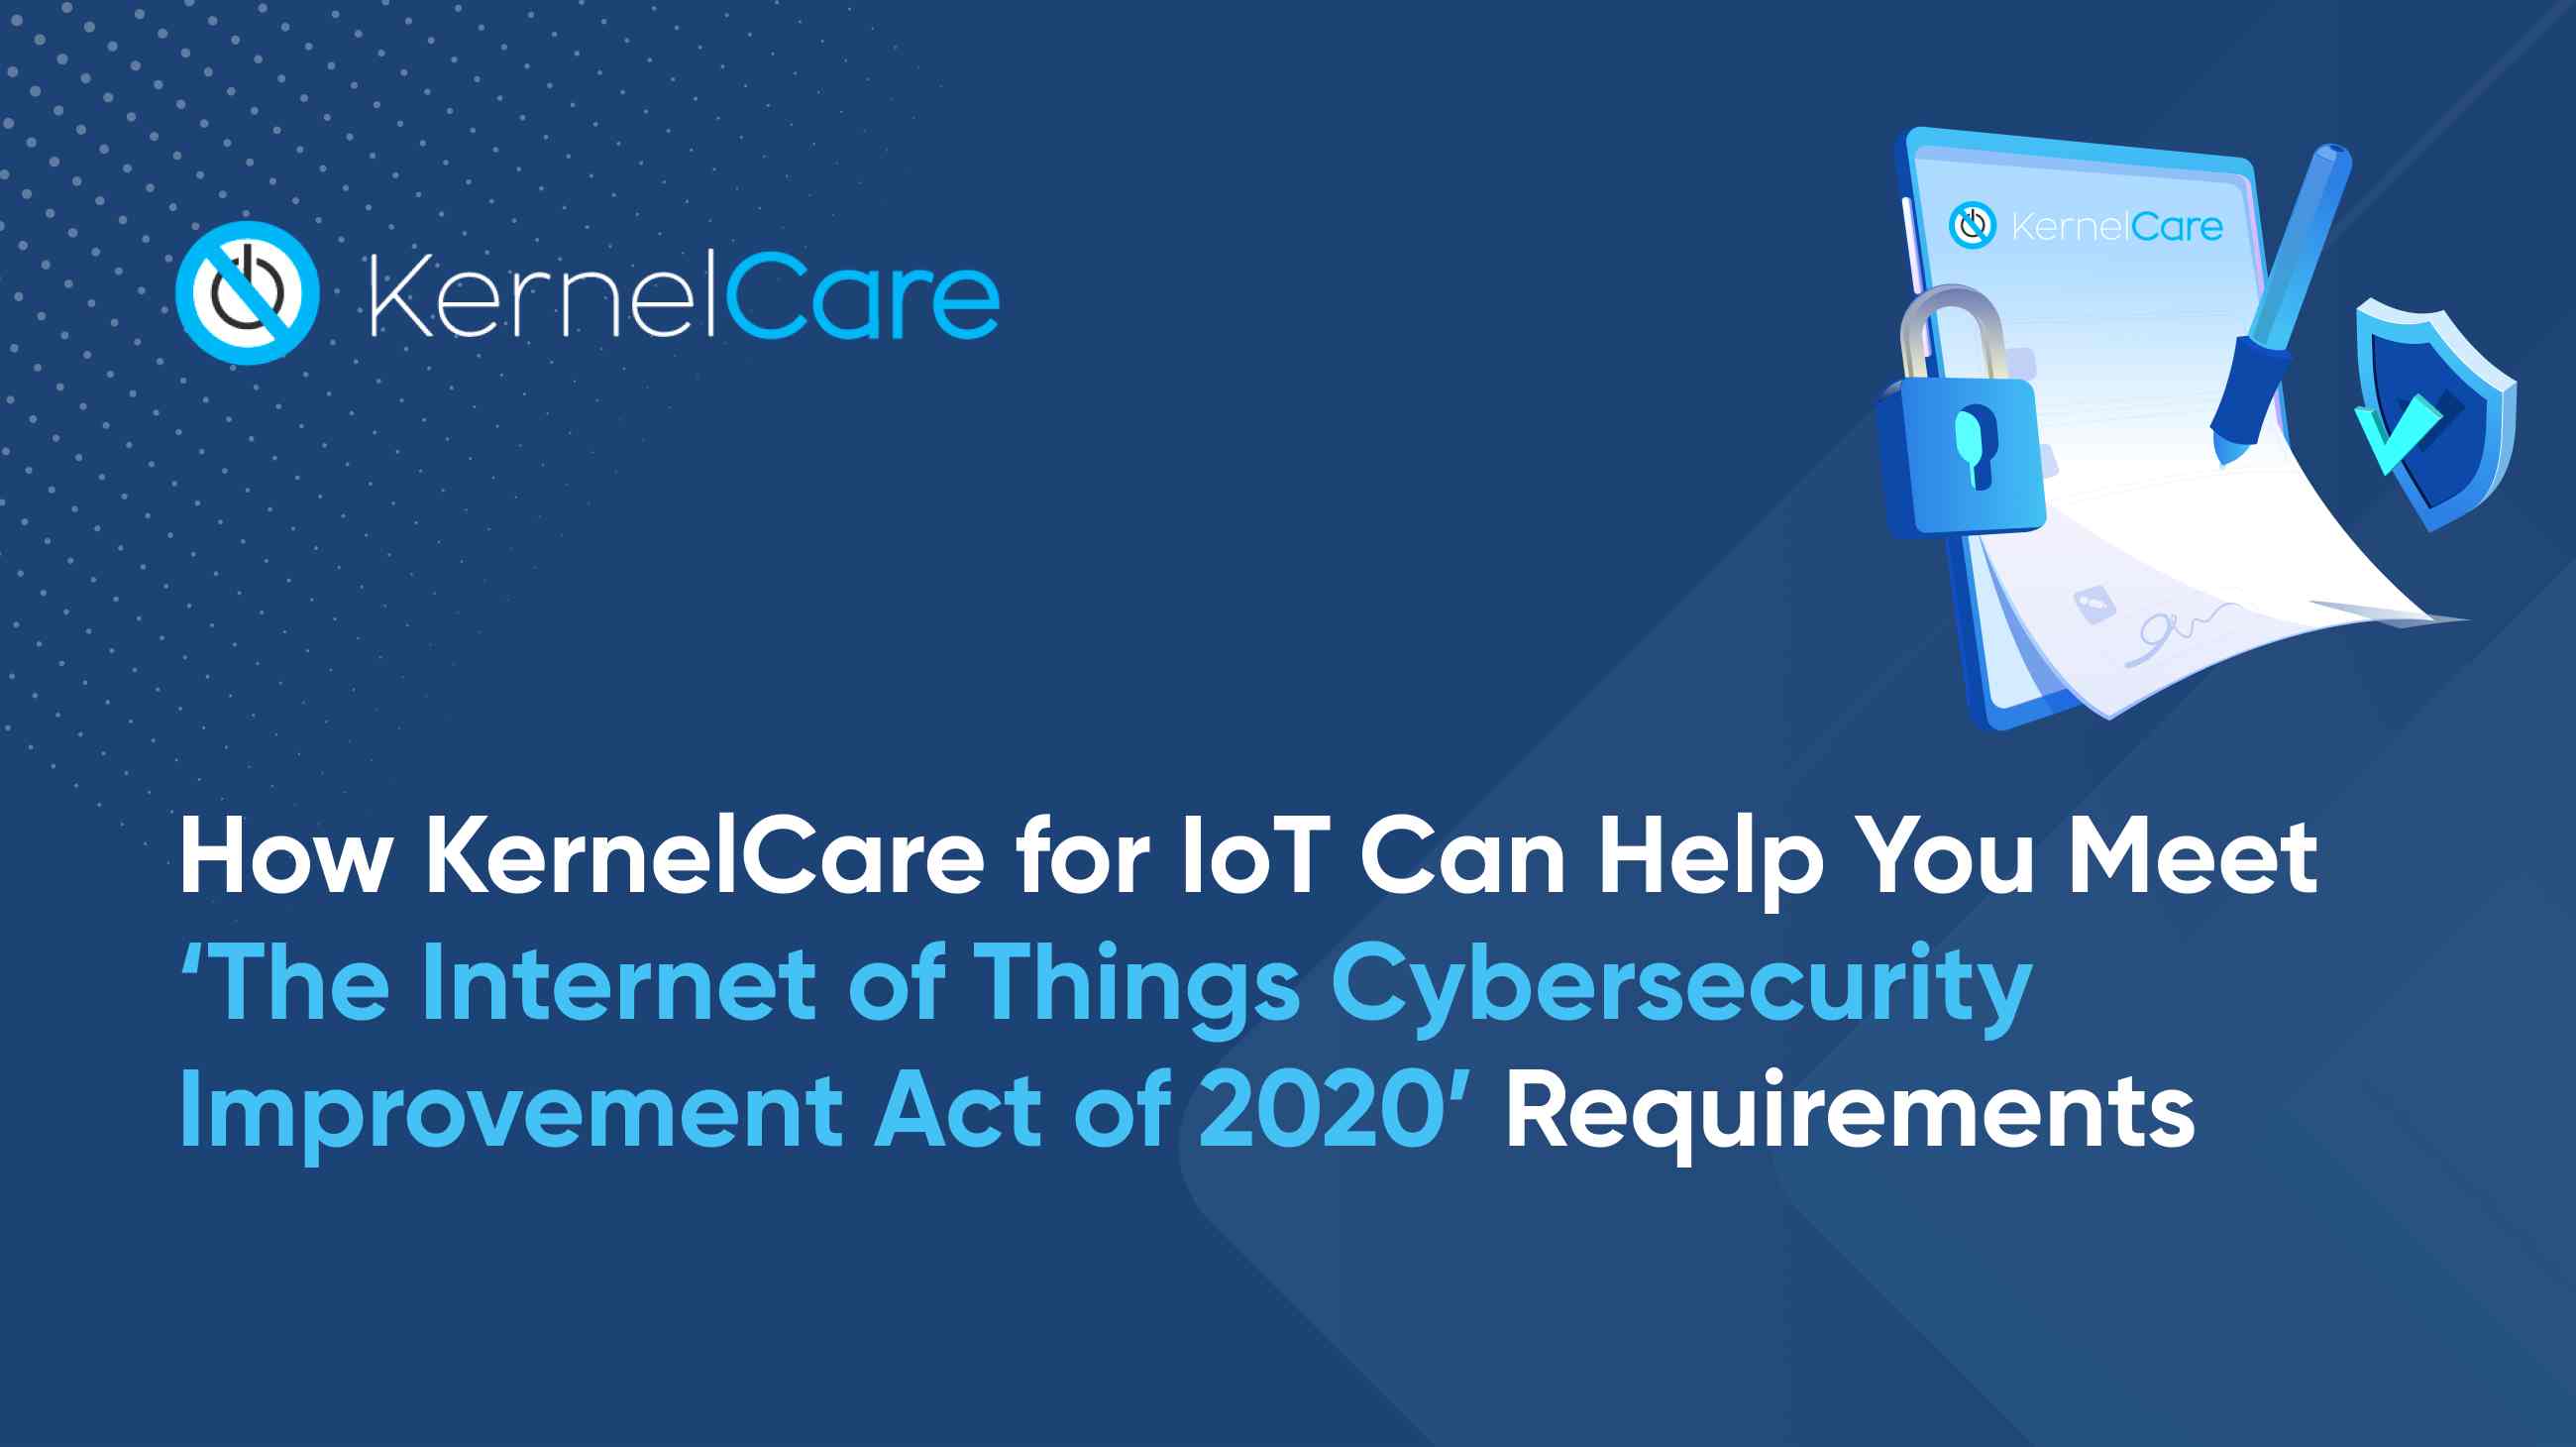 Meet The IoT Cybersecurity Improvement Act Requirements With KernelCare